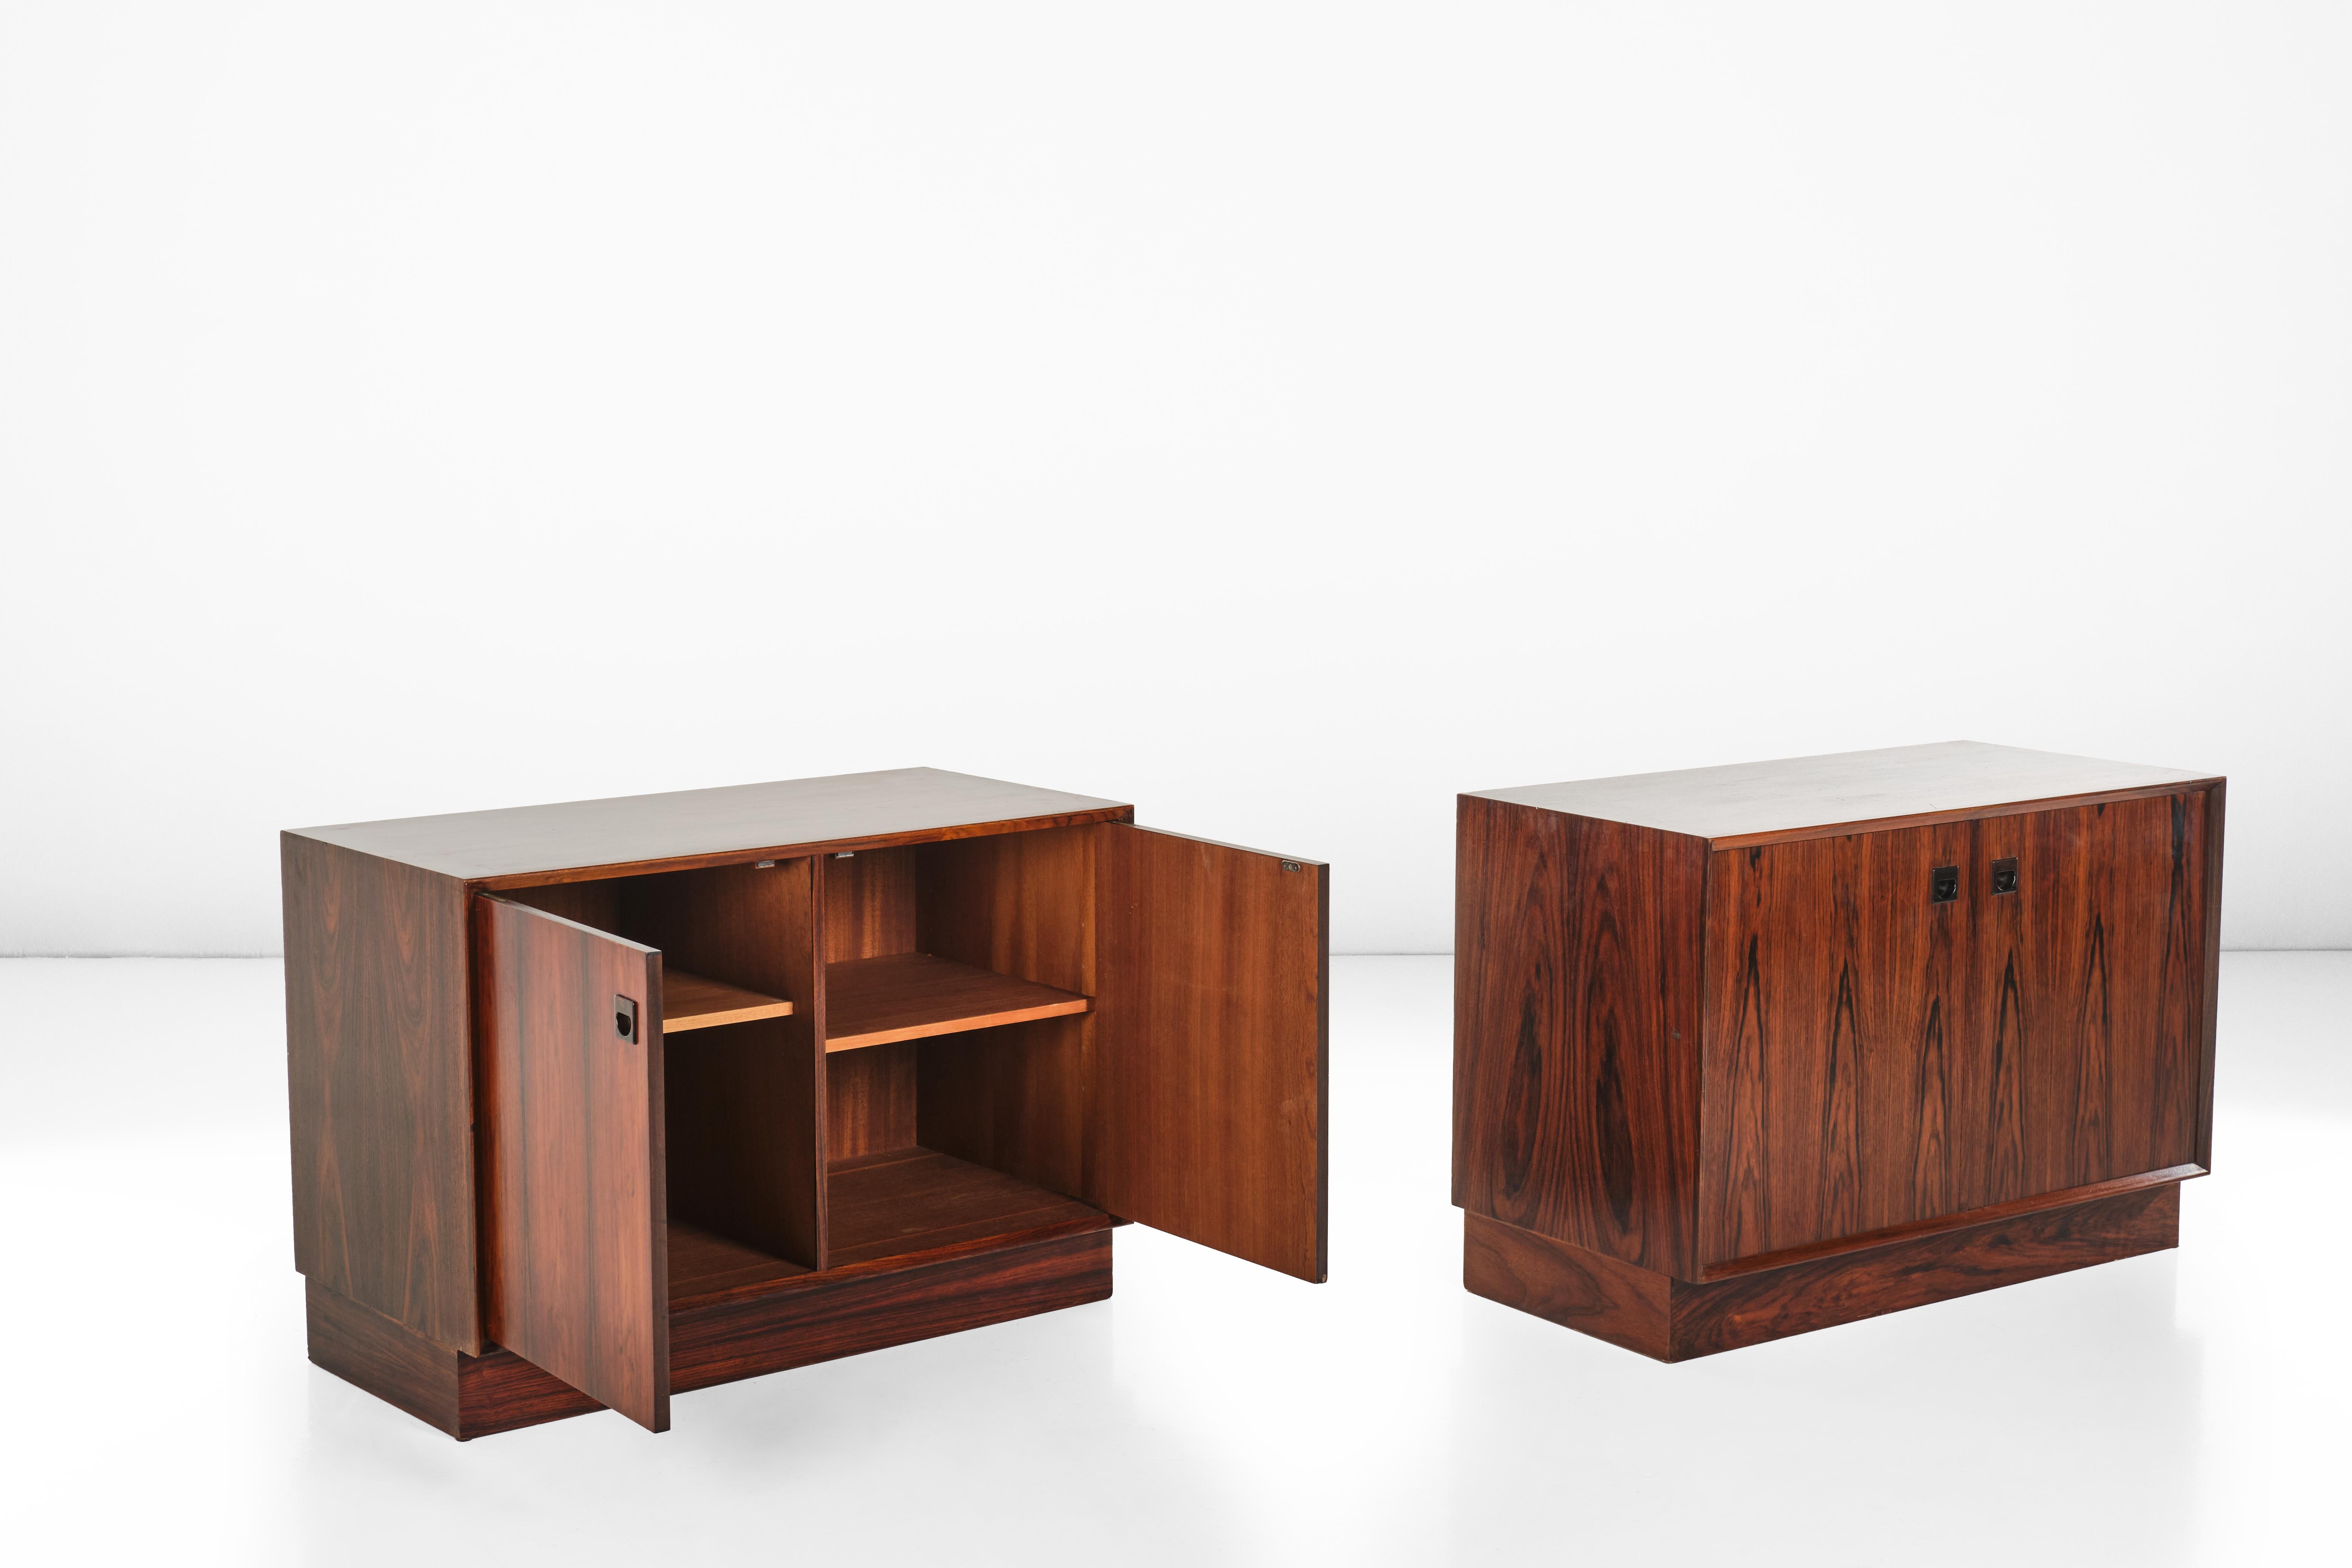 Two cabinets by Stilwood, Italy, 1950 circa.

These two cabinets are as simple as they are elegant with the simplicity of wood and the mastery of carved handles. From the production of postwar Italian furniture by one of the brands that has worked